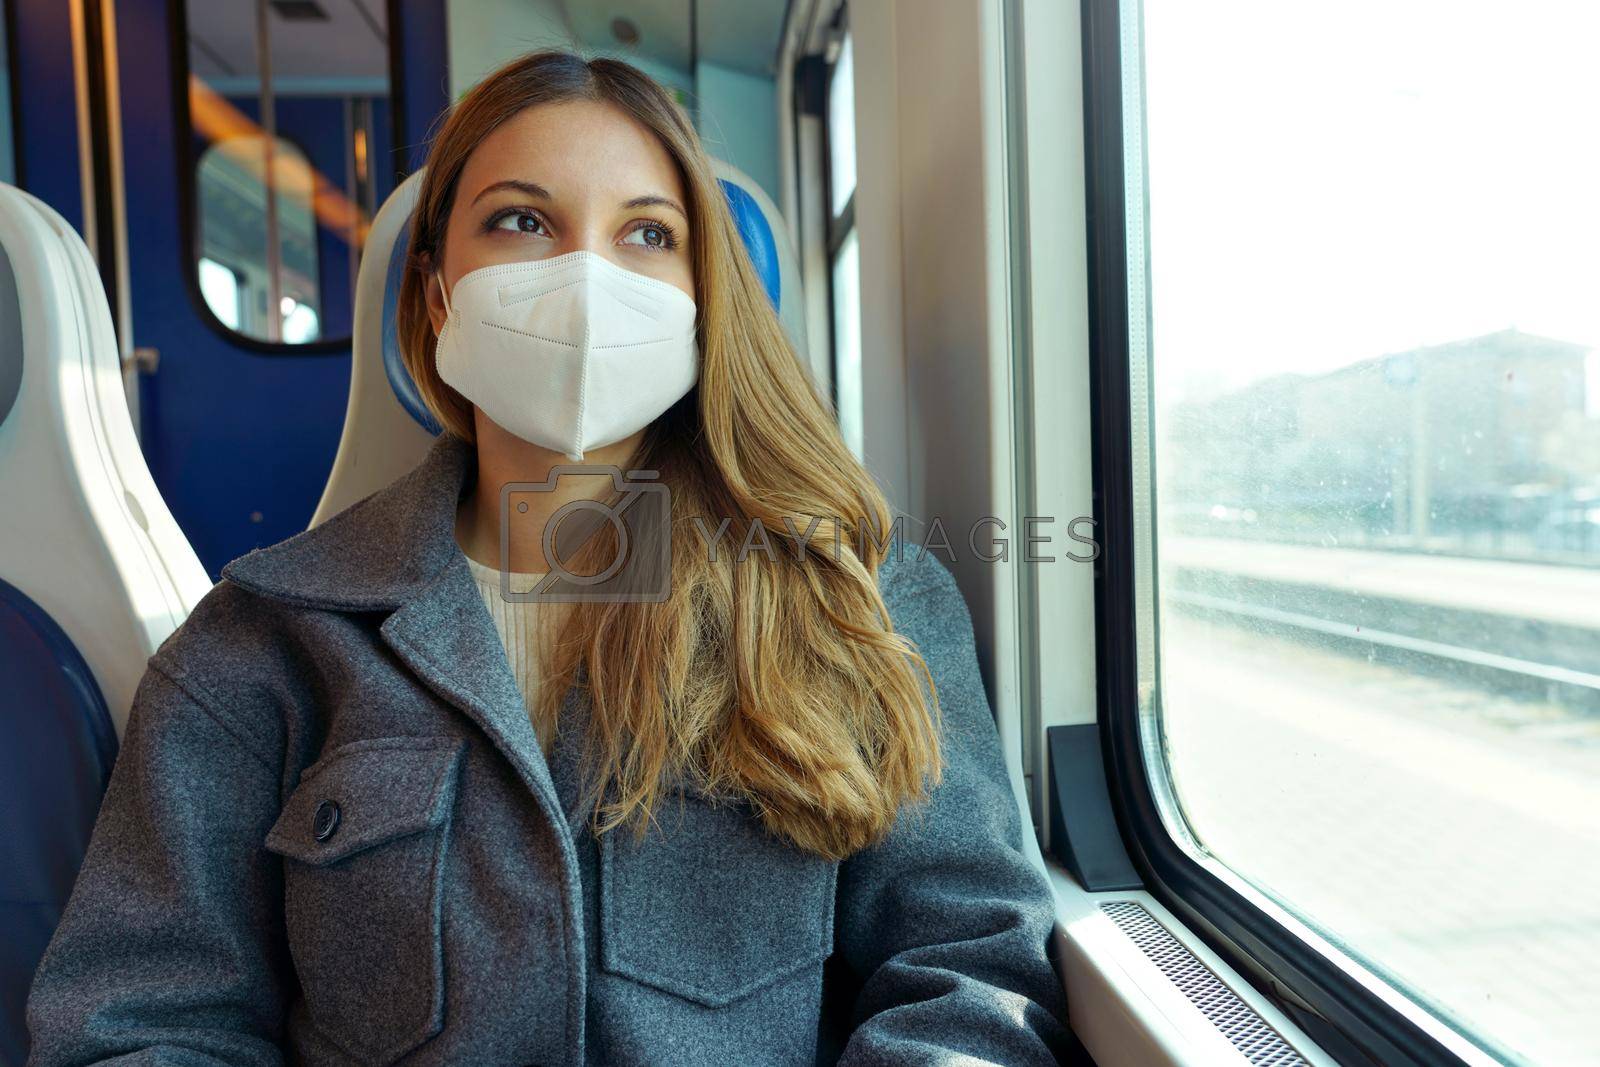 Protective mask mandatory on public transport. Portrait of young woman traveling on train looking through the window.